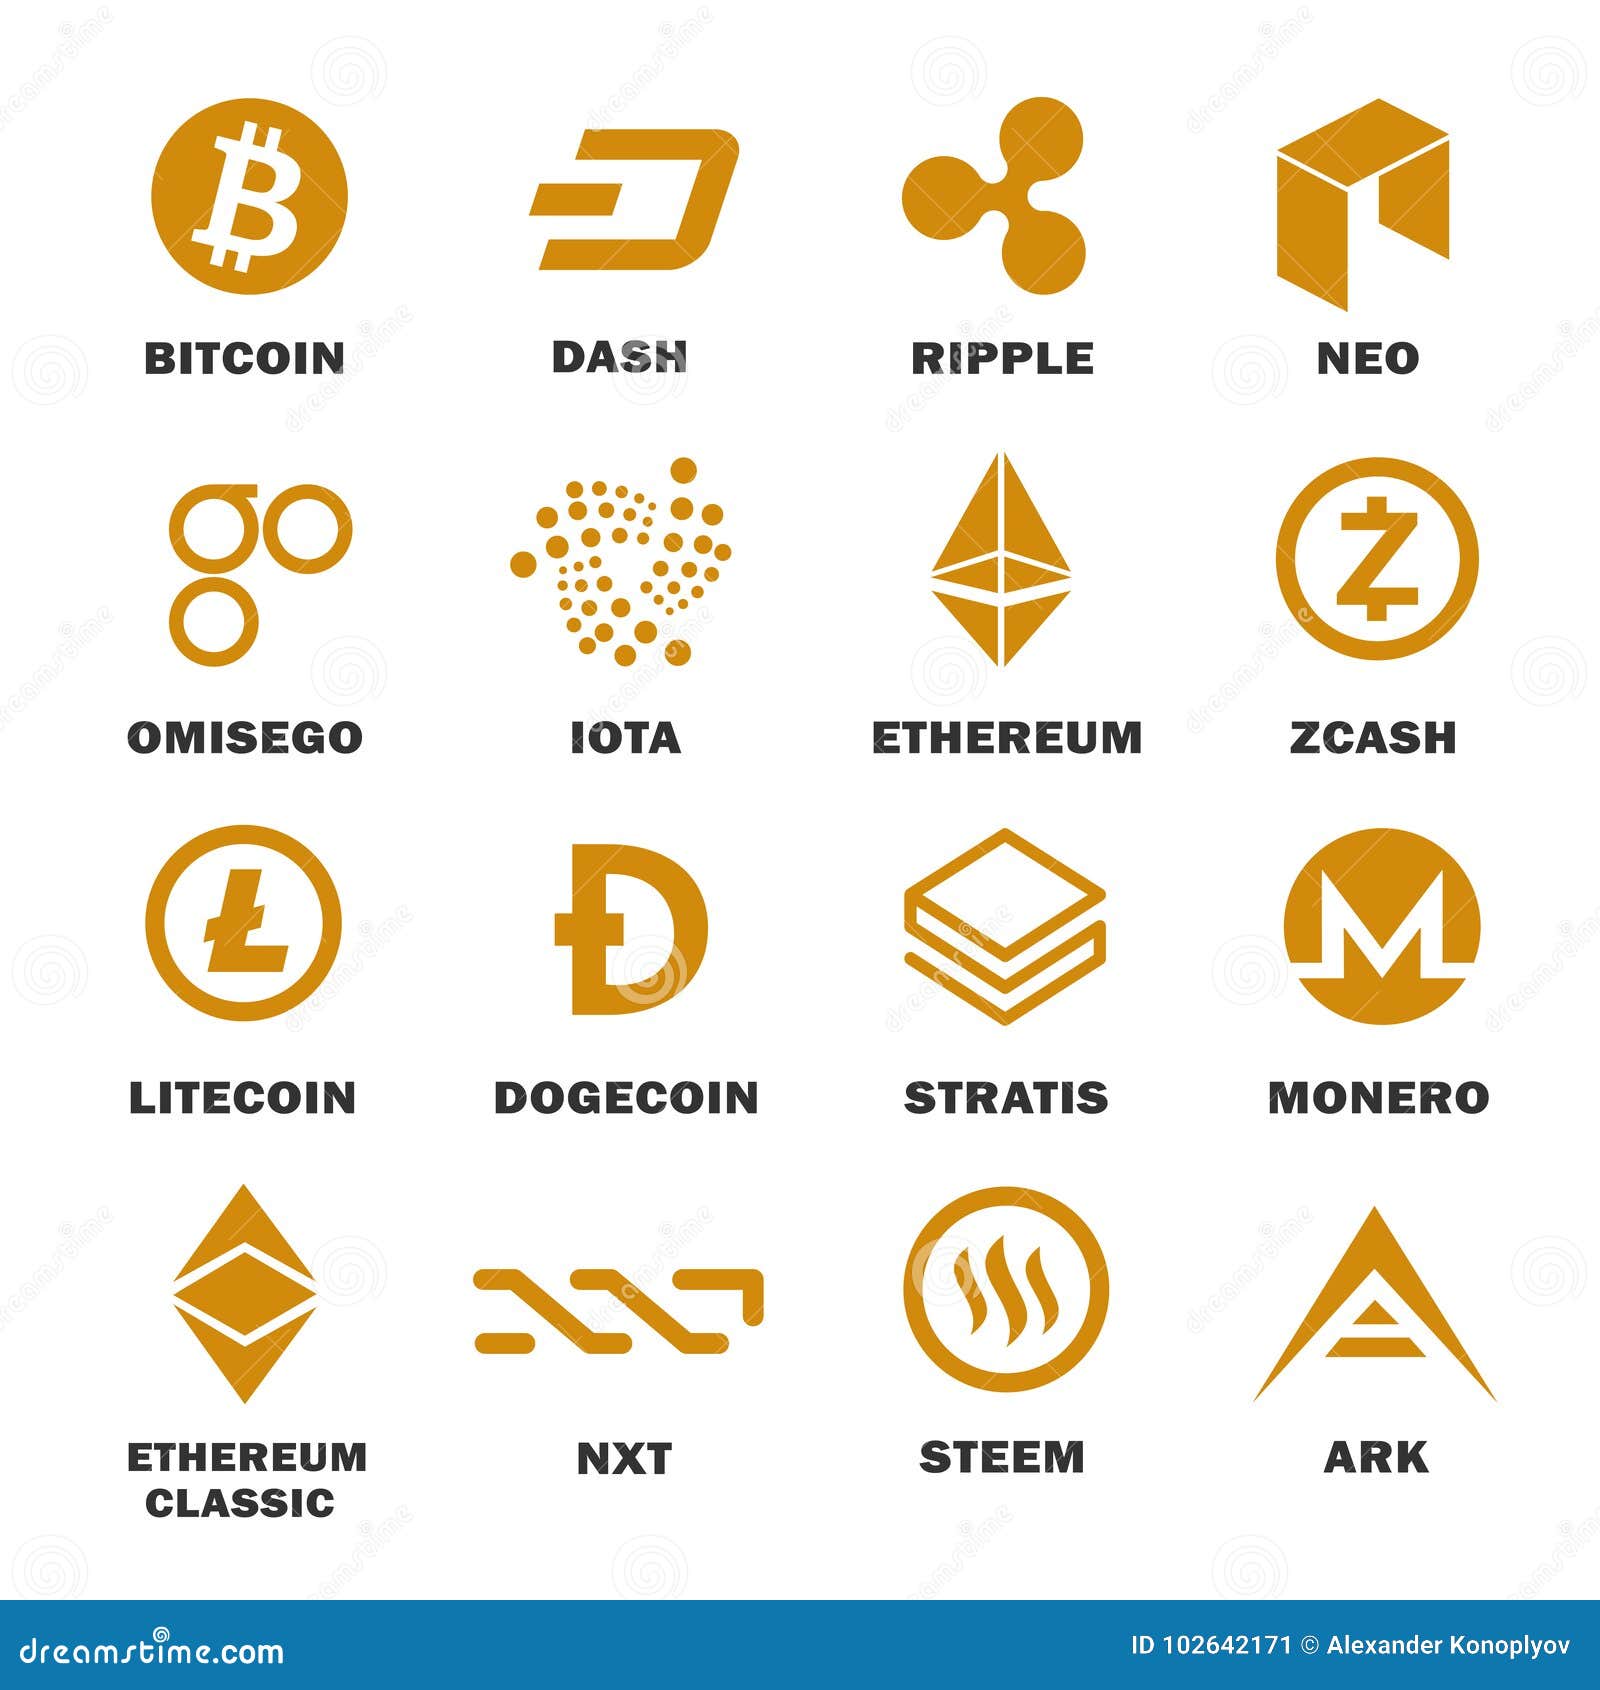 cryptocurrency names suggestions